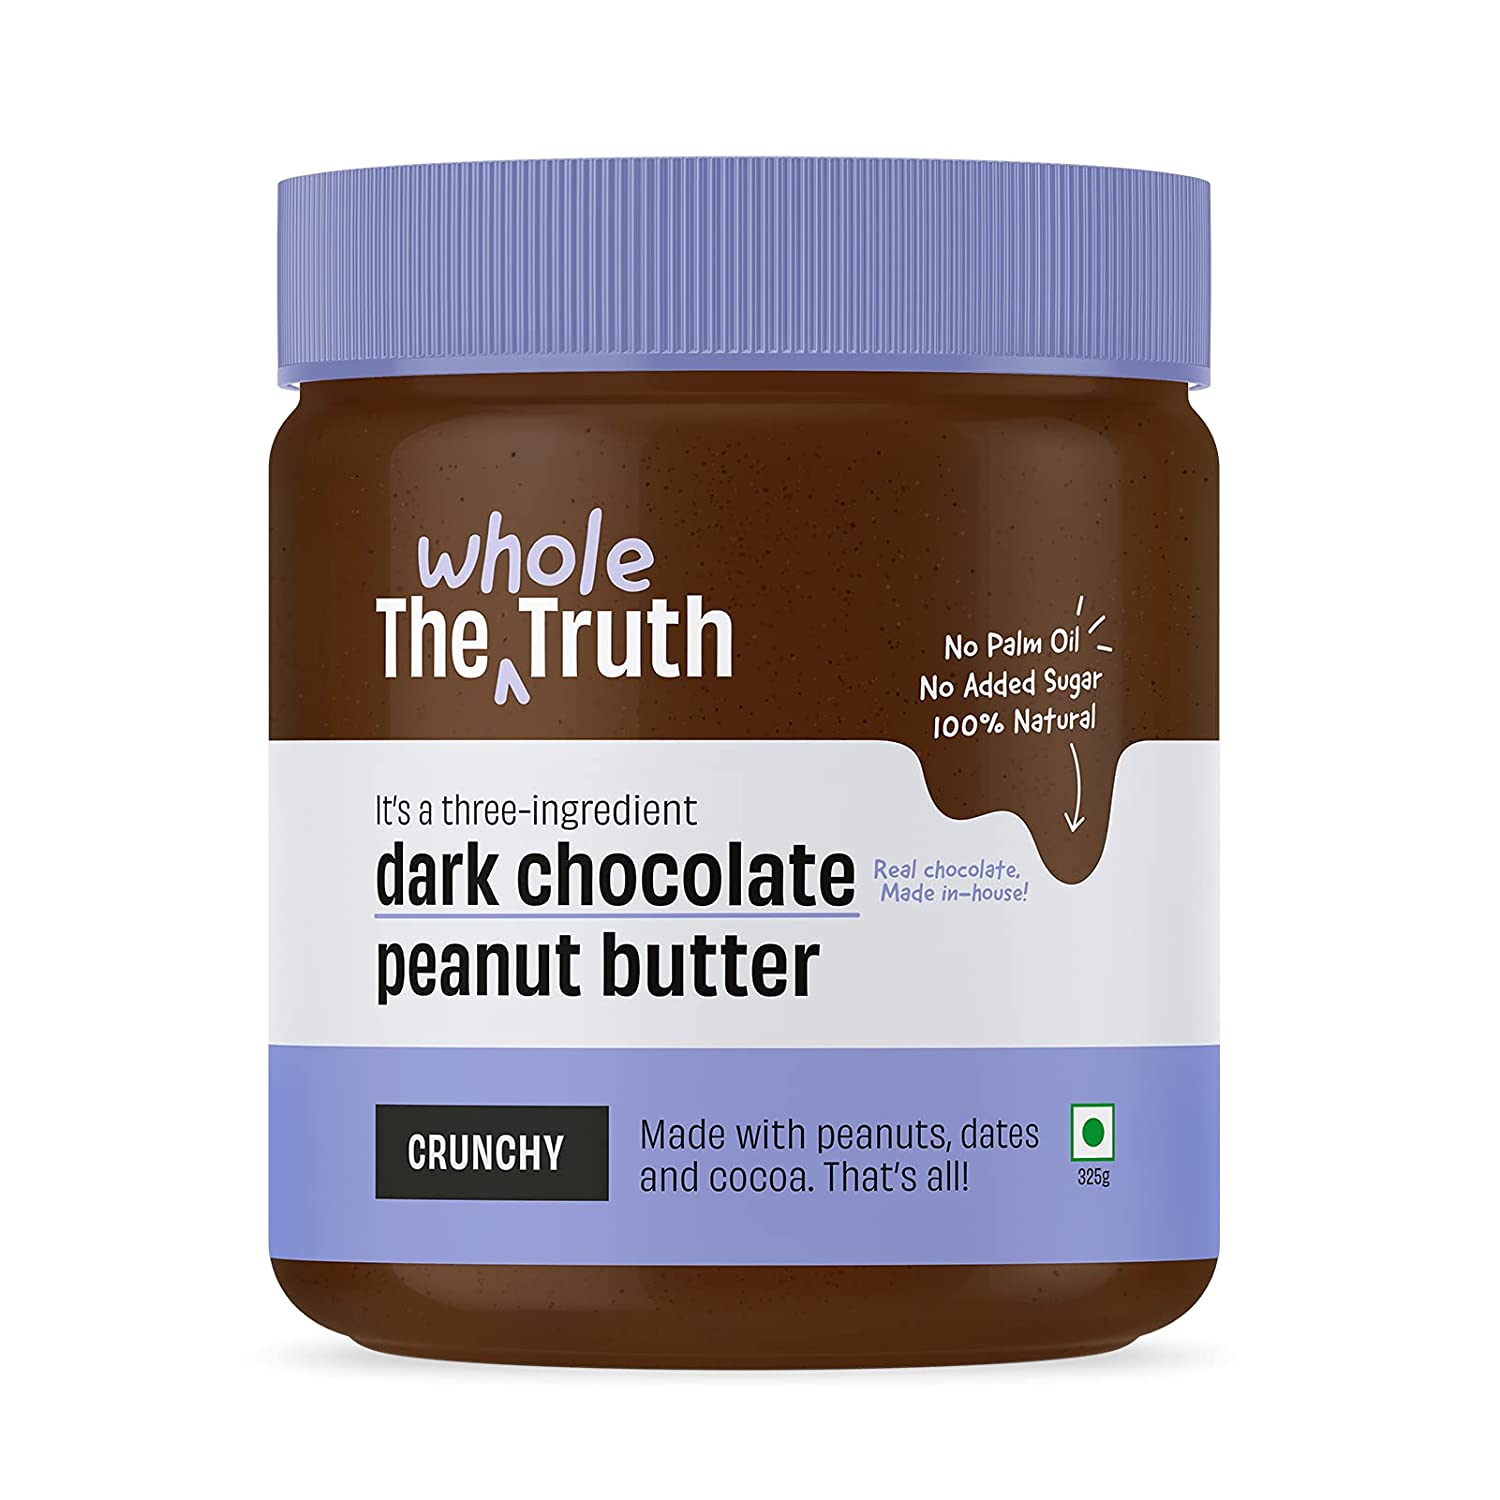 the-whole-truth-peanut-butter